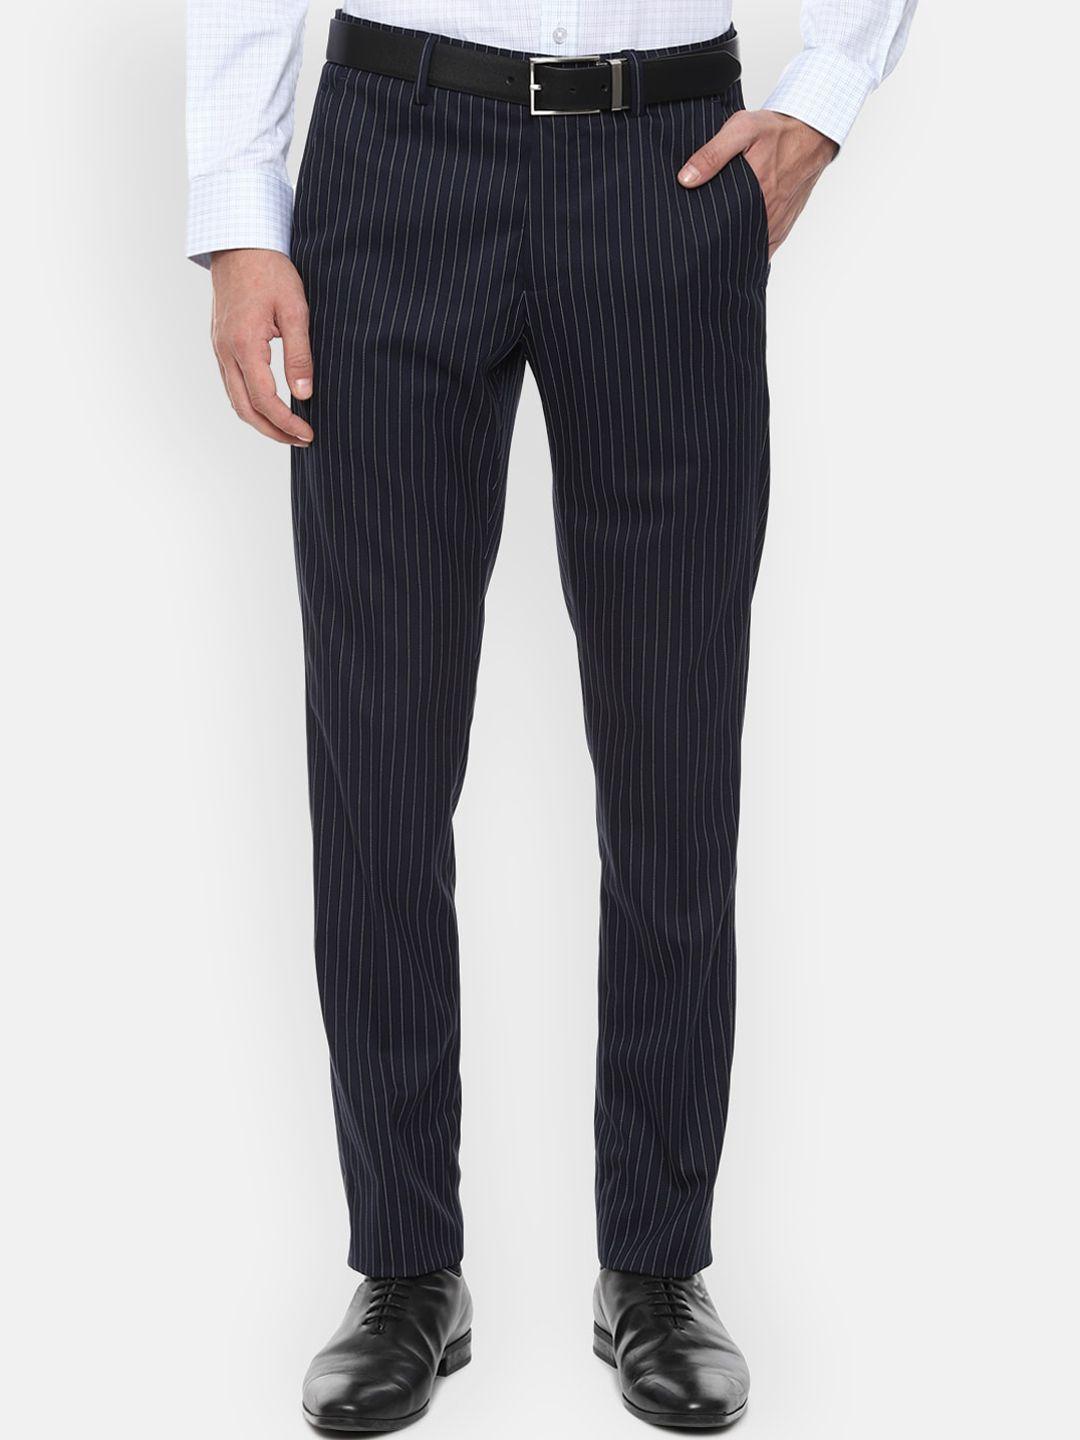 louis philippe men navy blue striped slim fit formal trousers